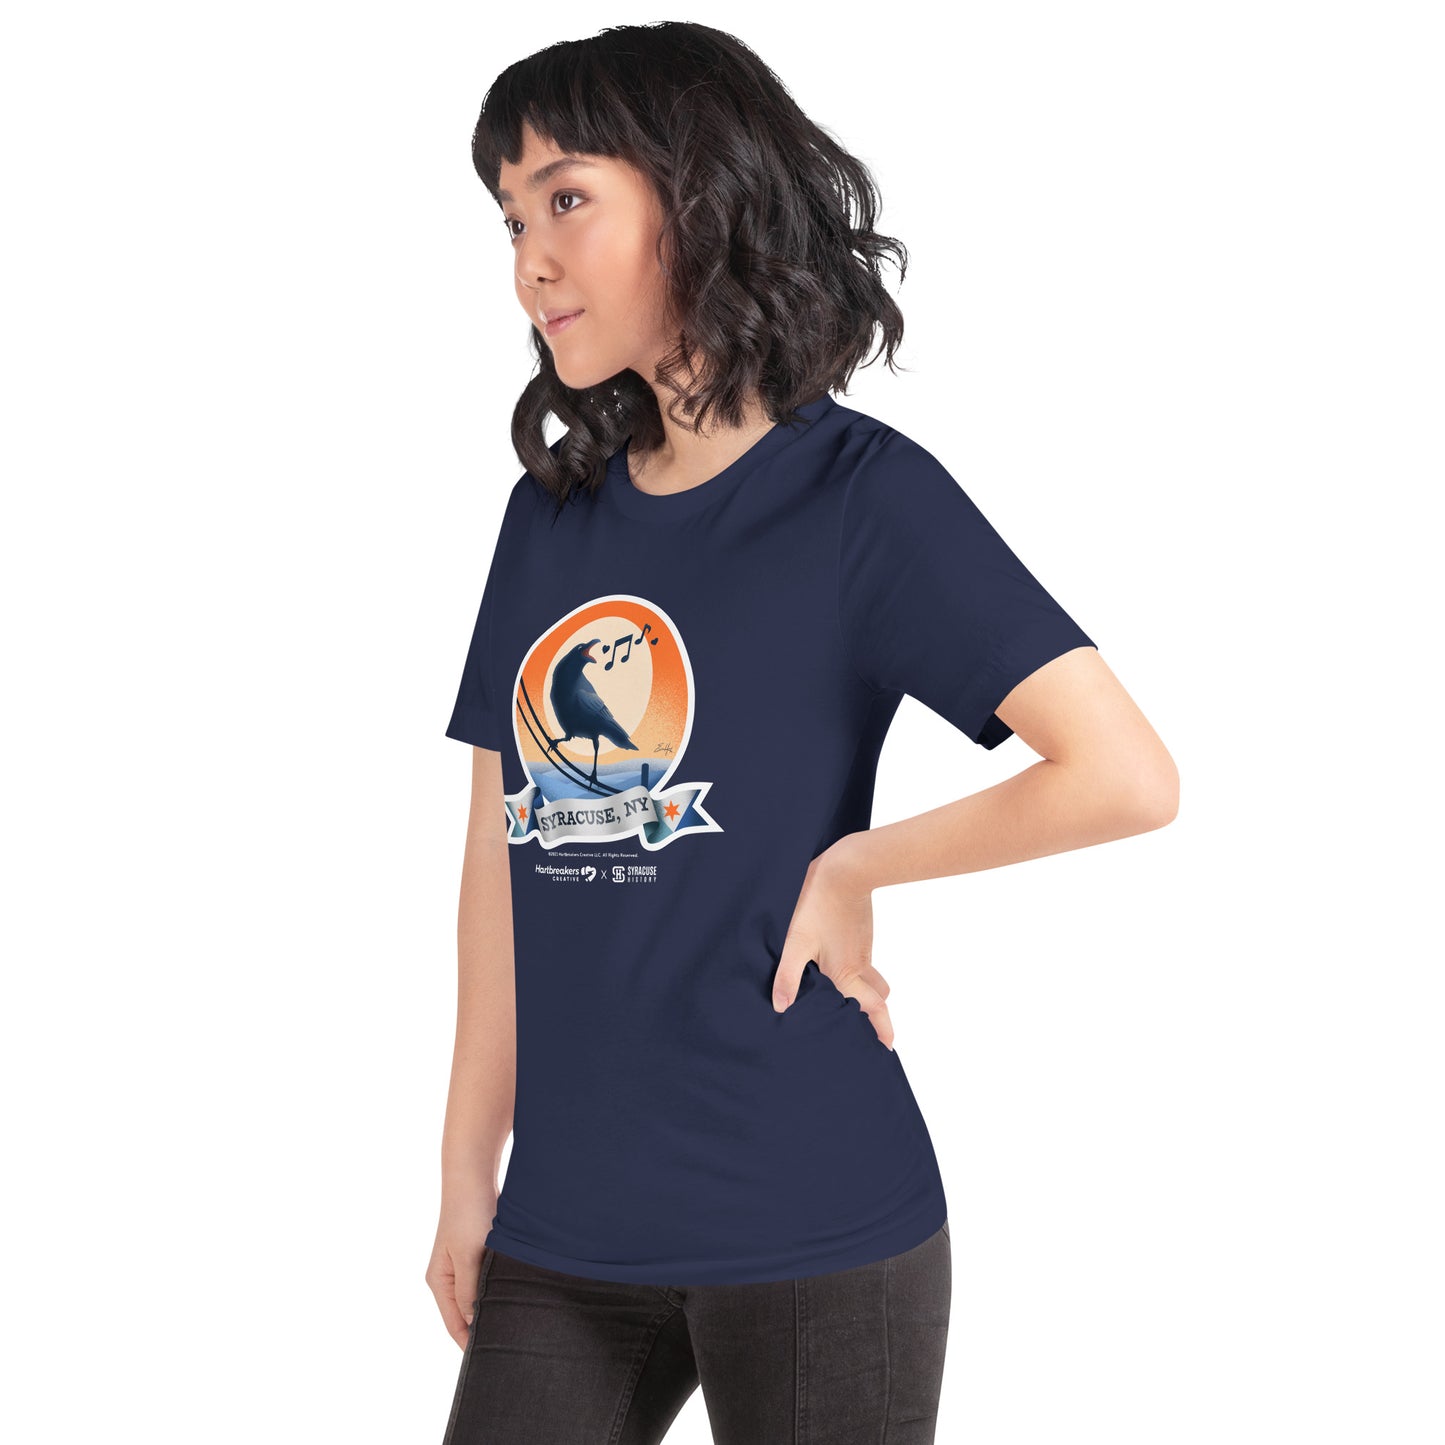 A woman wearing a navy T-shirt featuring an illustration of a crow on a telephone wire and a banner beneath it that says Syracuse, NY